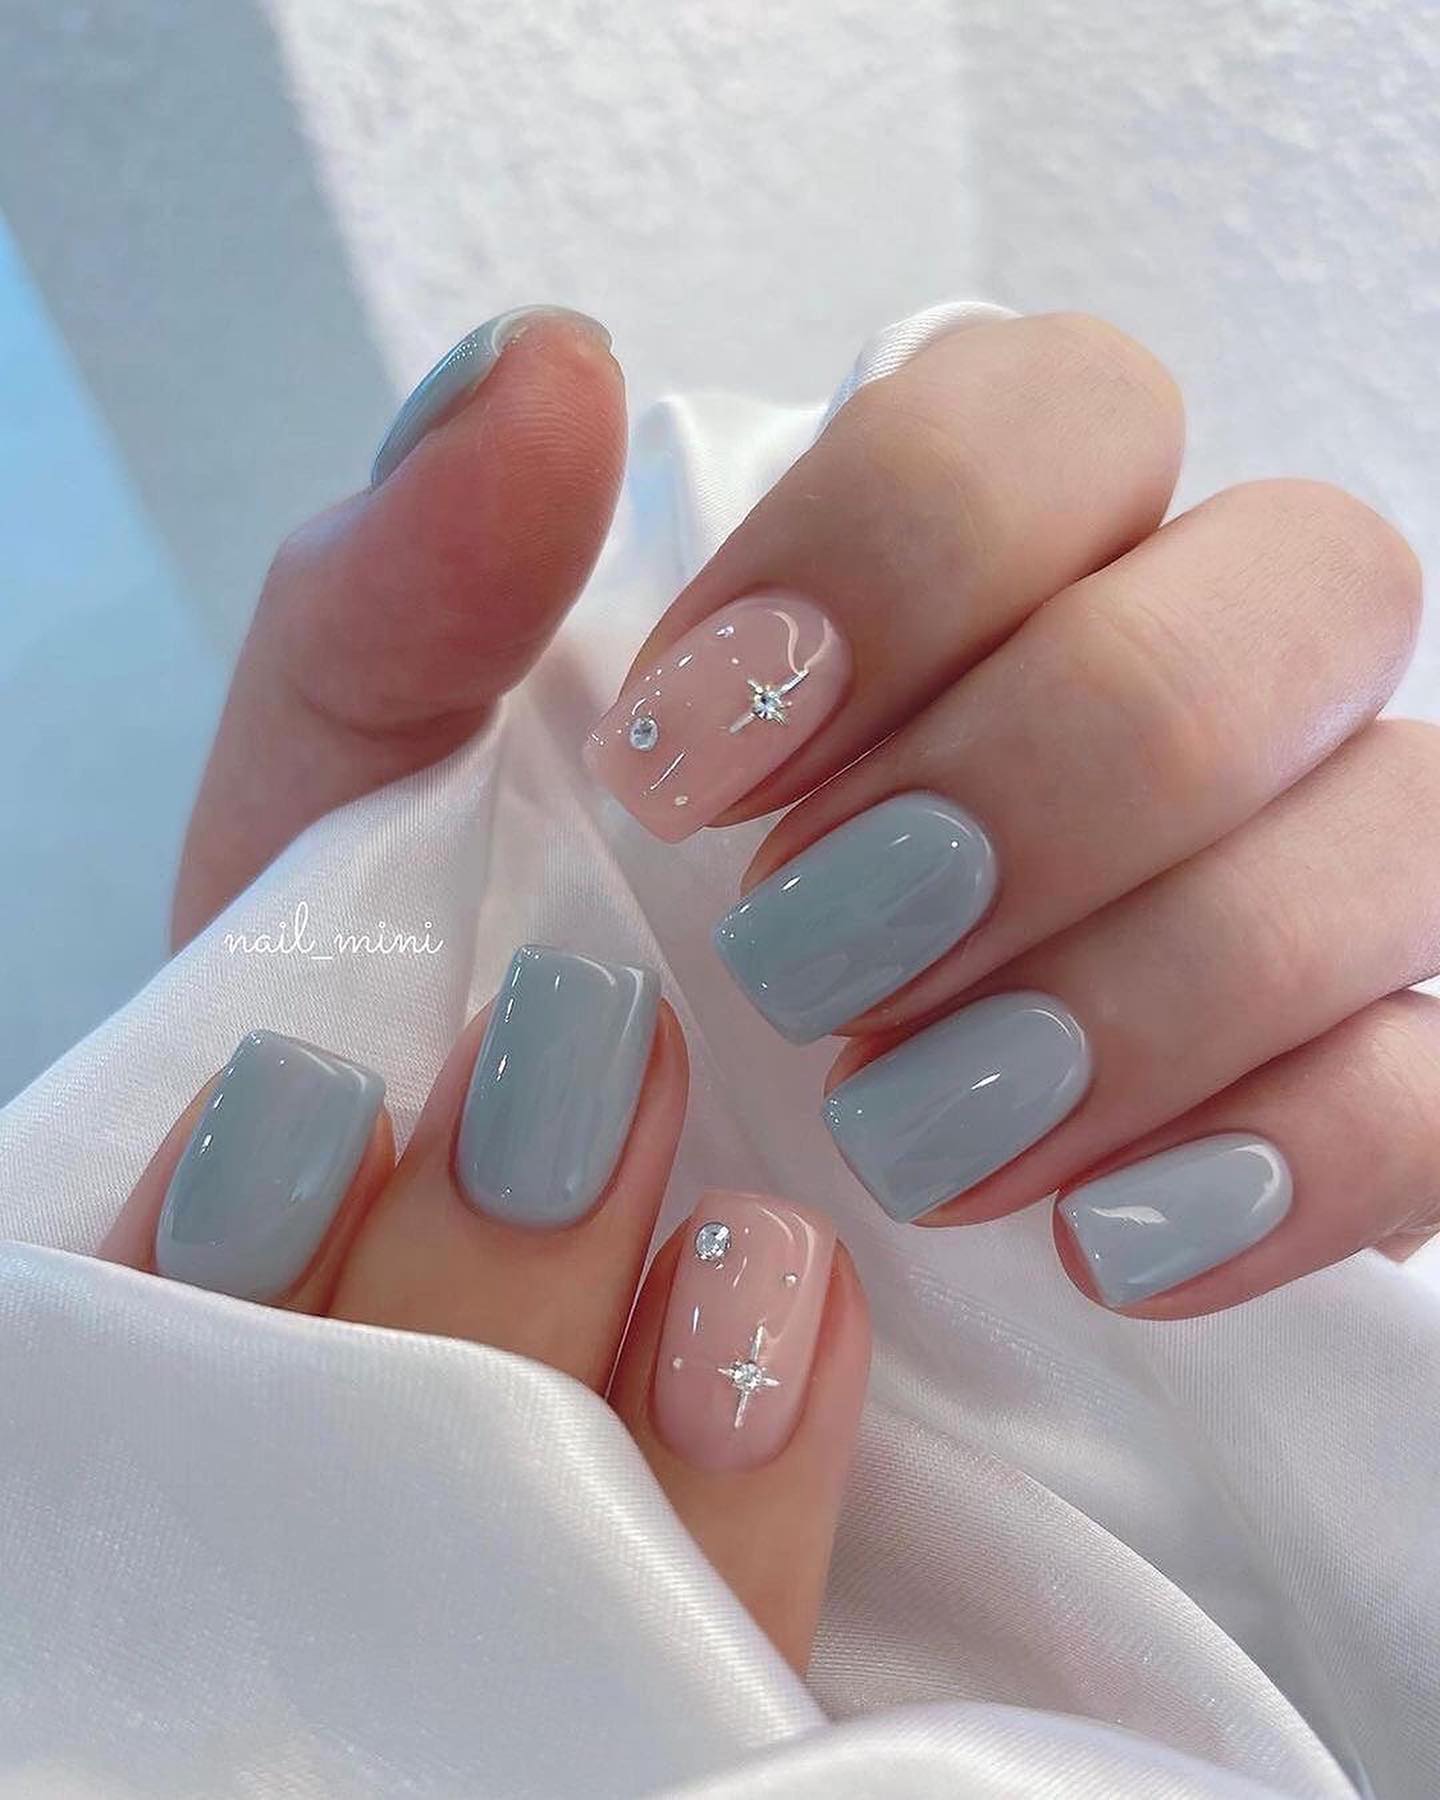 100 Pretty Spring Nail Designs To Try This Year images 30